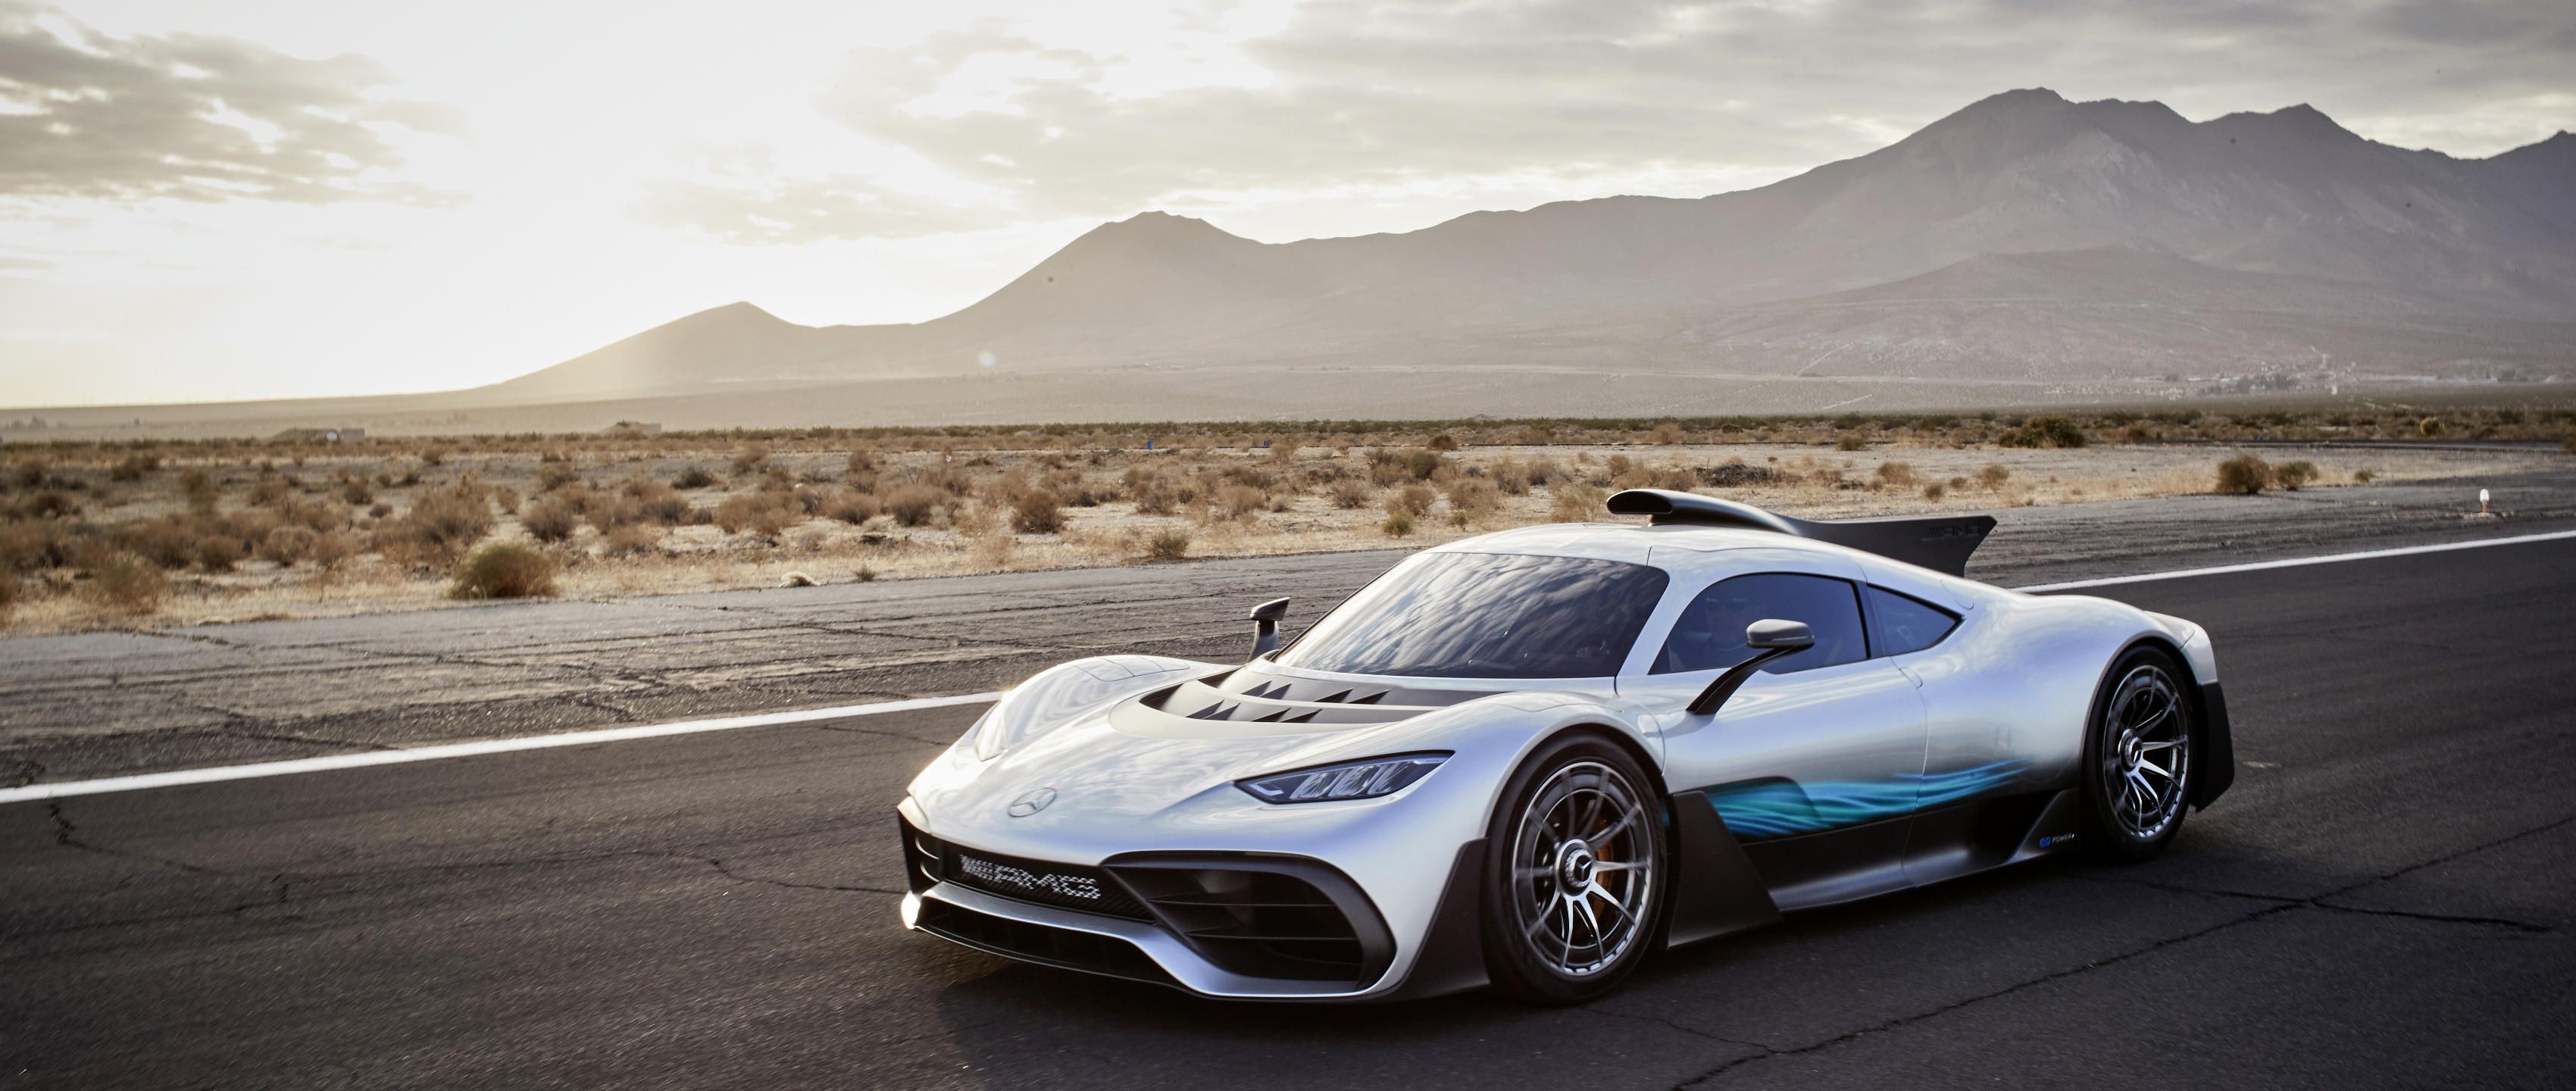 Mercedes Amg Project One 2017 Wallpapers